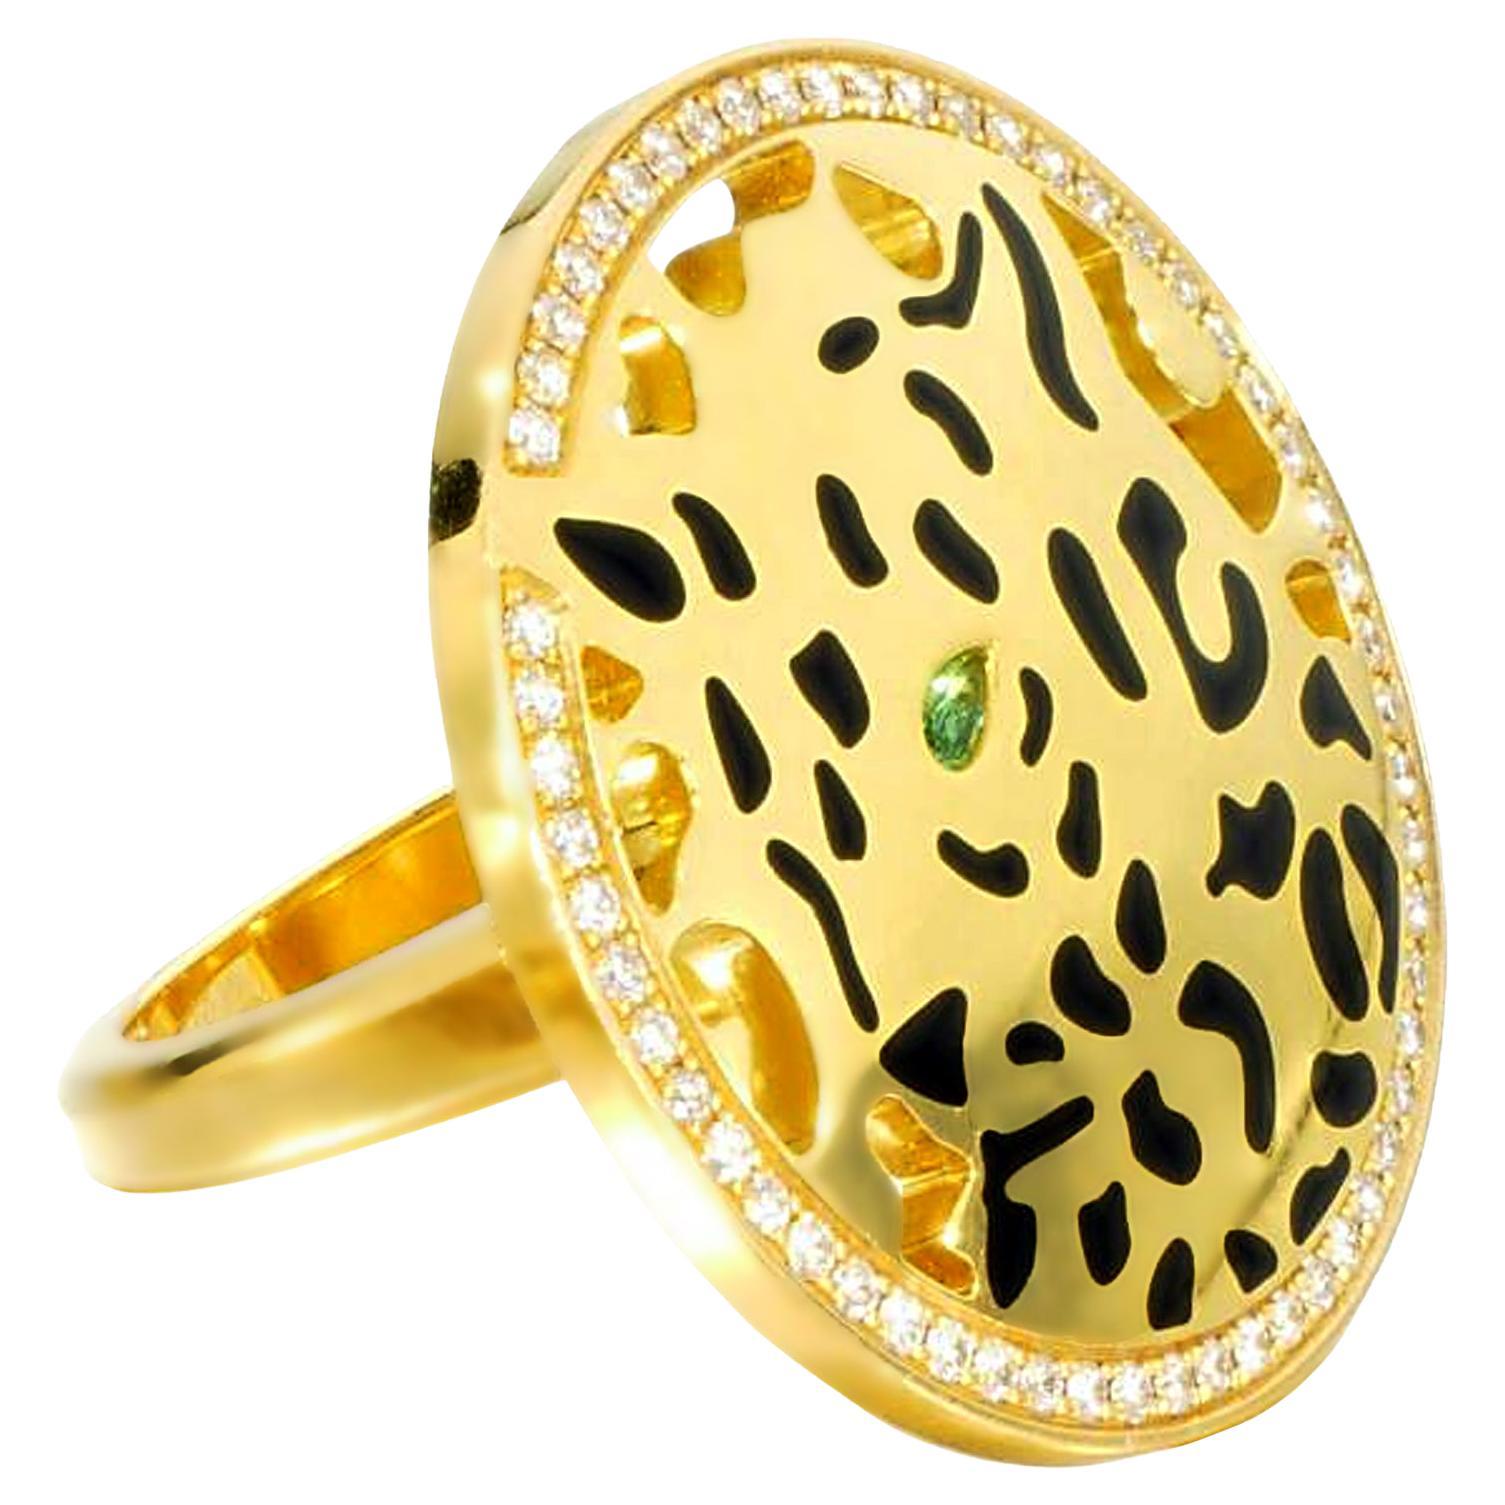 Cartier Panthere De Cartier Yellow Gold Diamond Ring For Sale